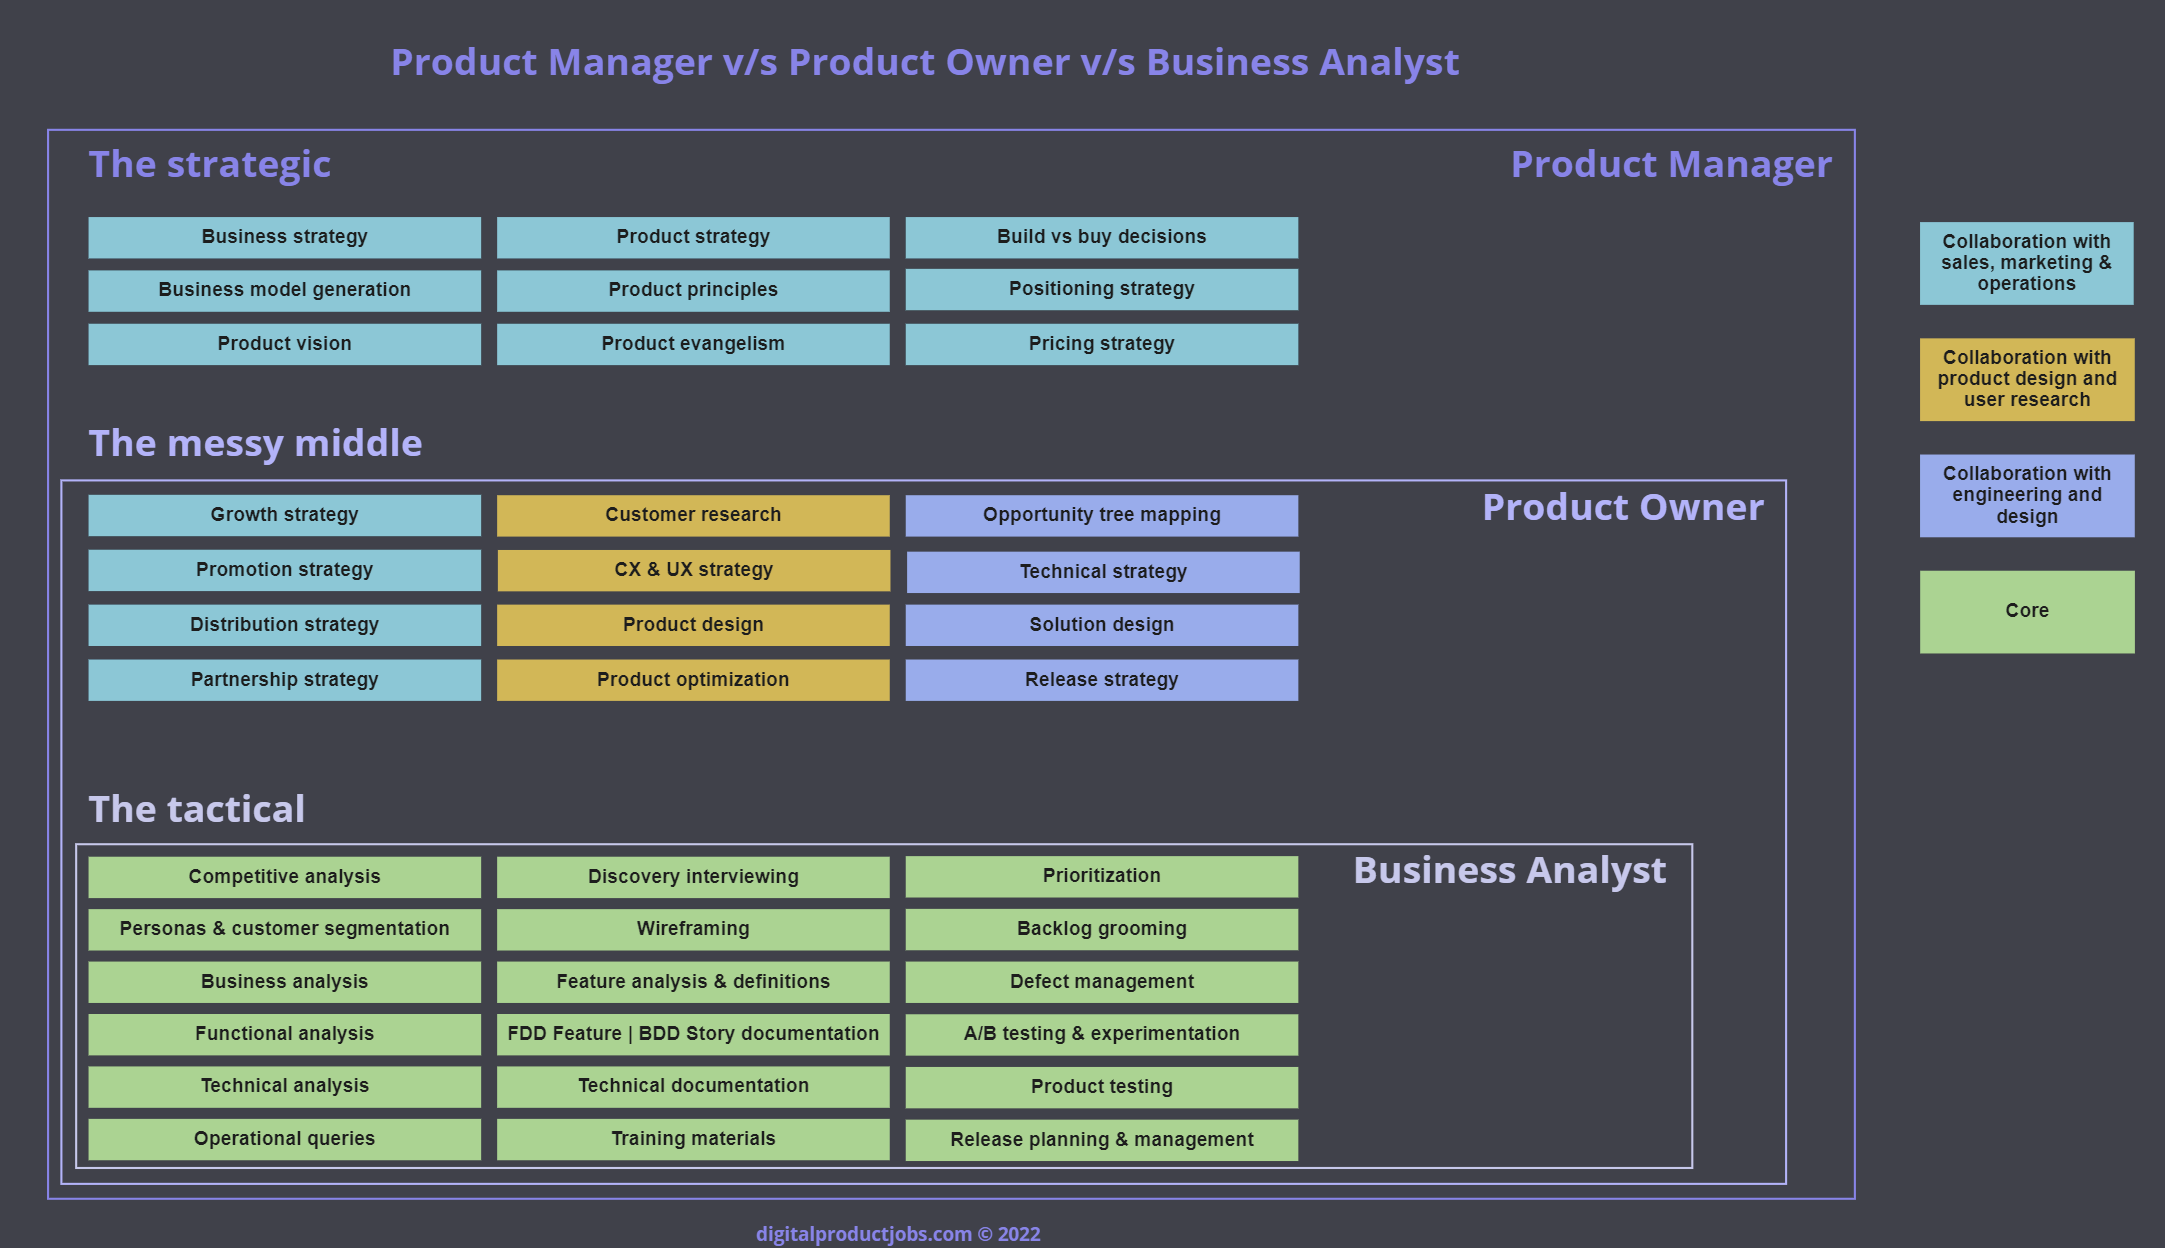 Why do they keep hiring product owners 🧐 & not product managers?! And why you should avoid companies that do!